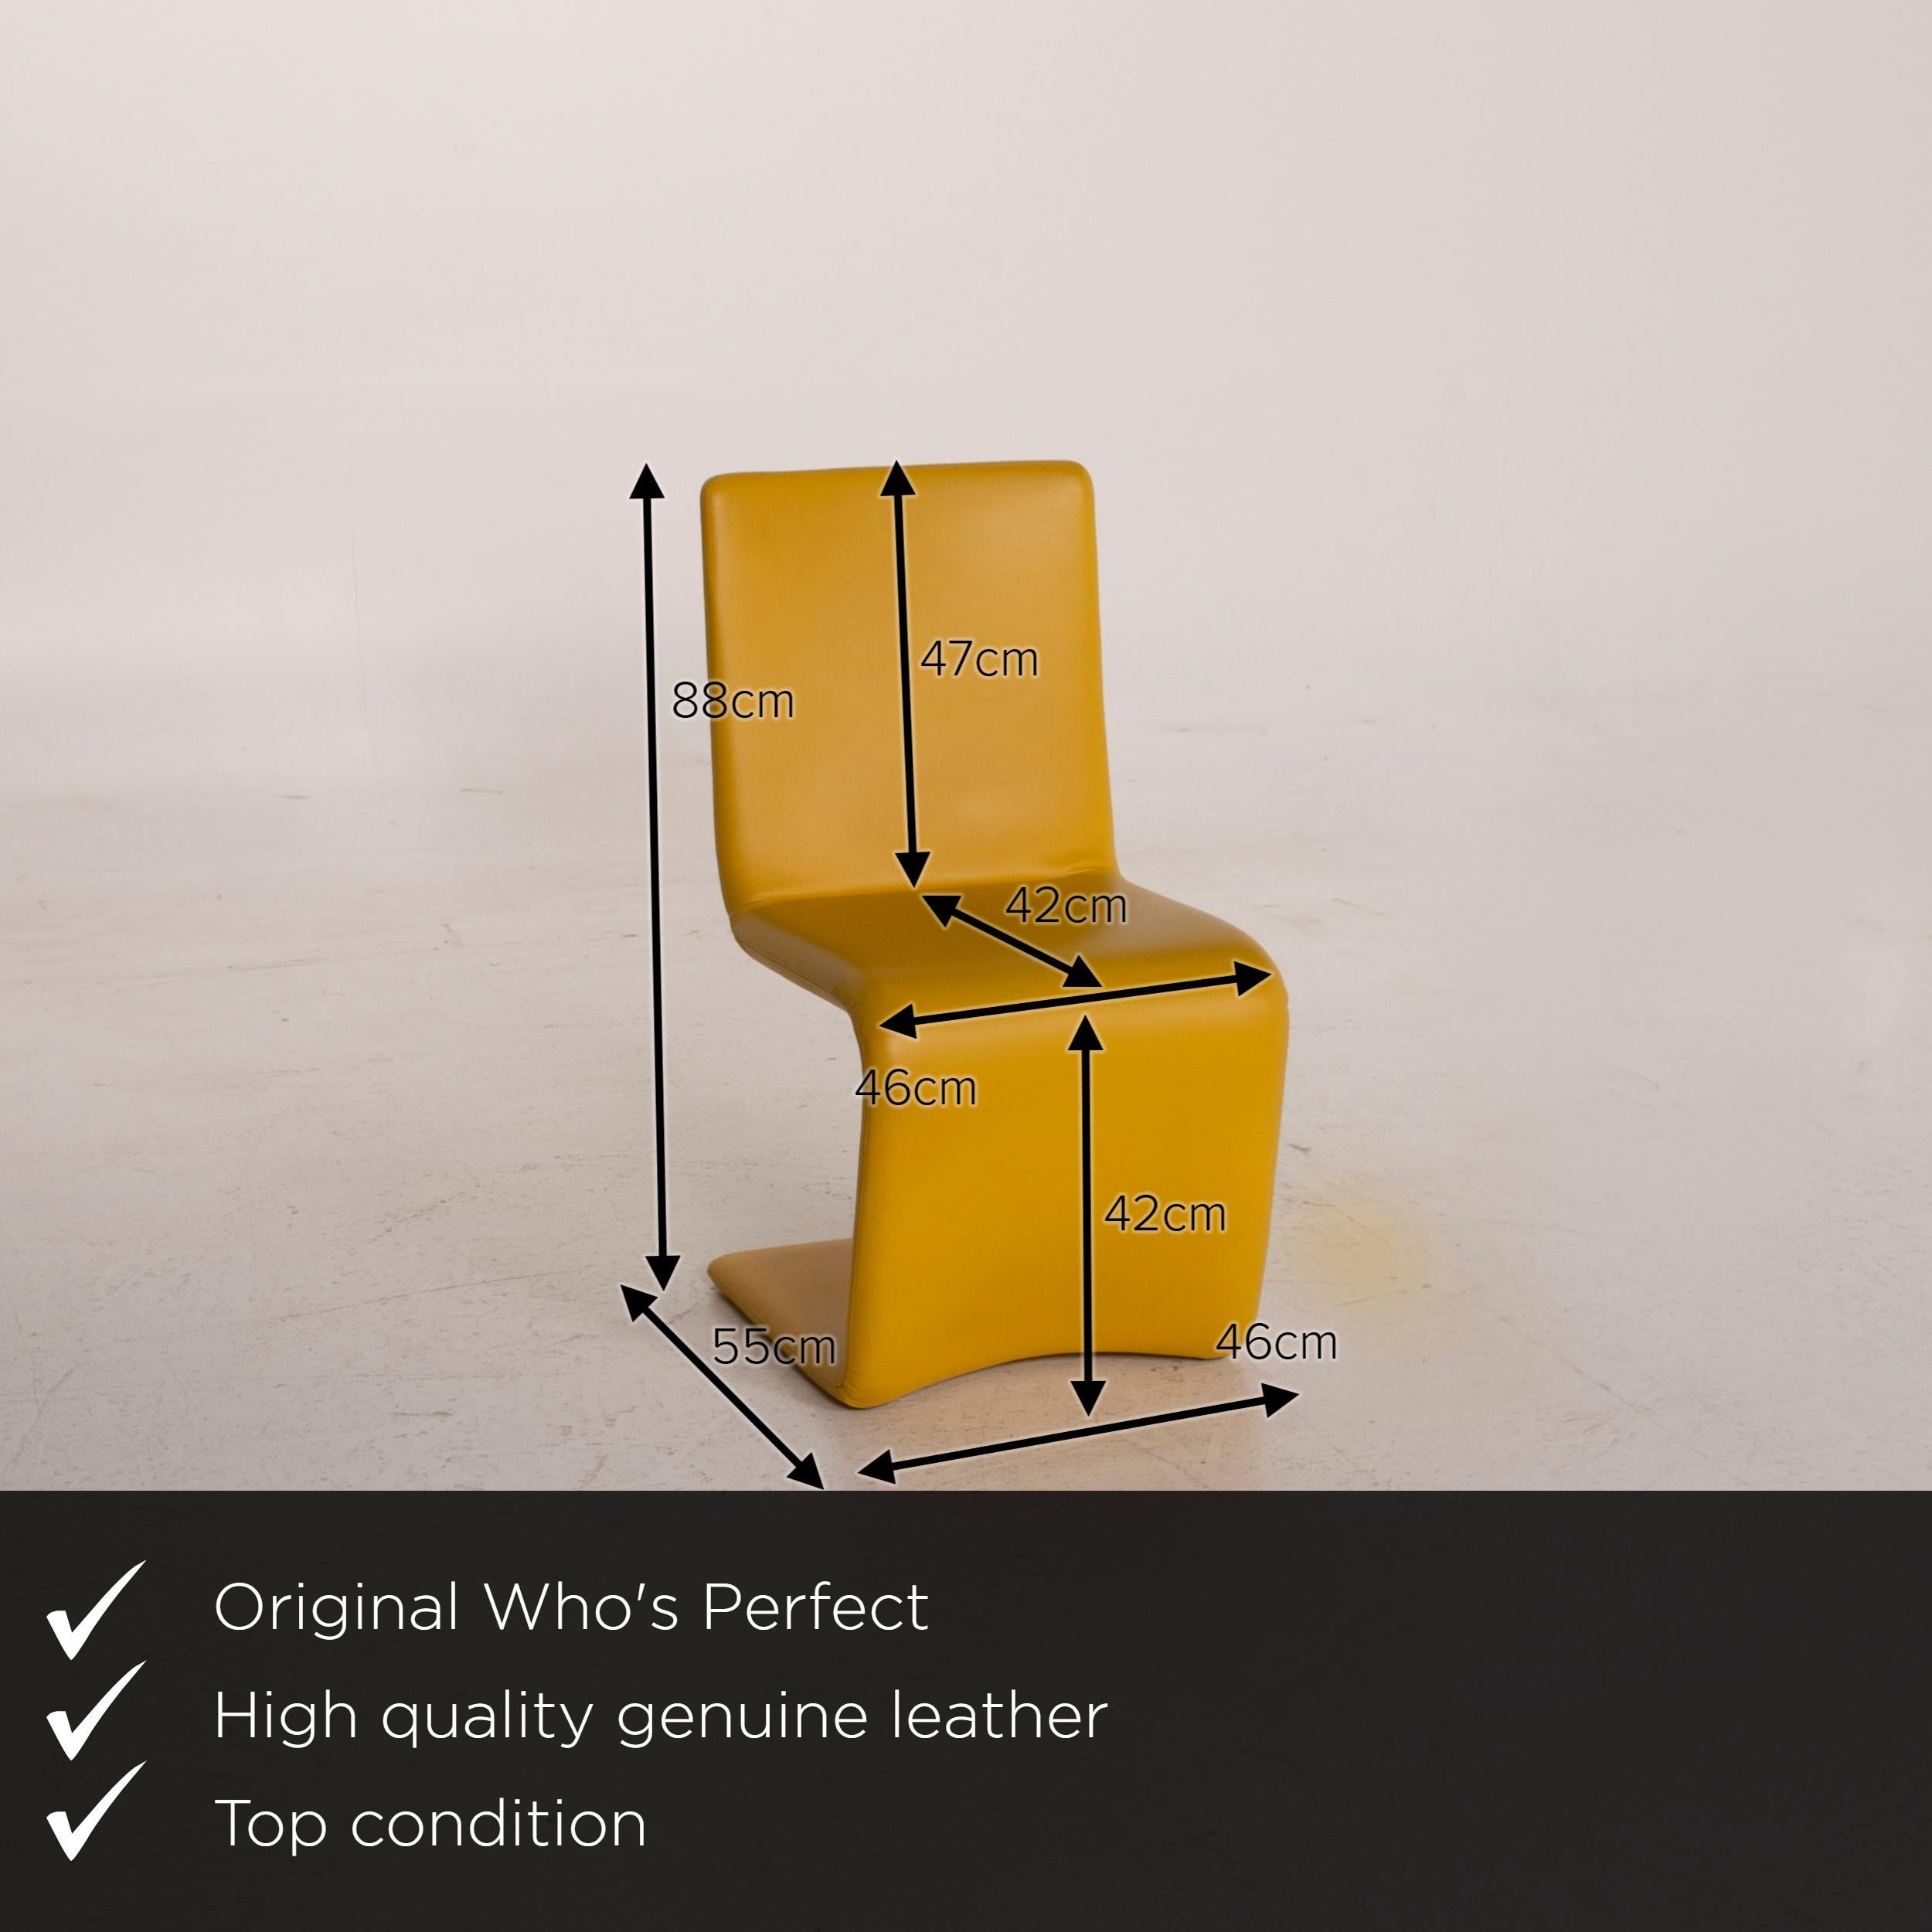 We present to you a Who's Perfect Venere leather chair yellow.

 

 Product measurements in centimeters:
 

Depth 55
Width 46
Height 89
Seat height 47
Seat depth 42
Seat width 46
Back height 42.

  